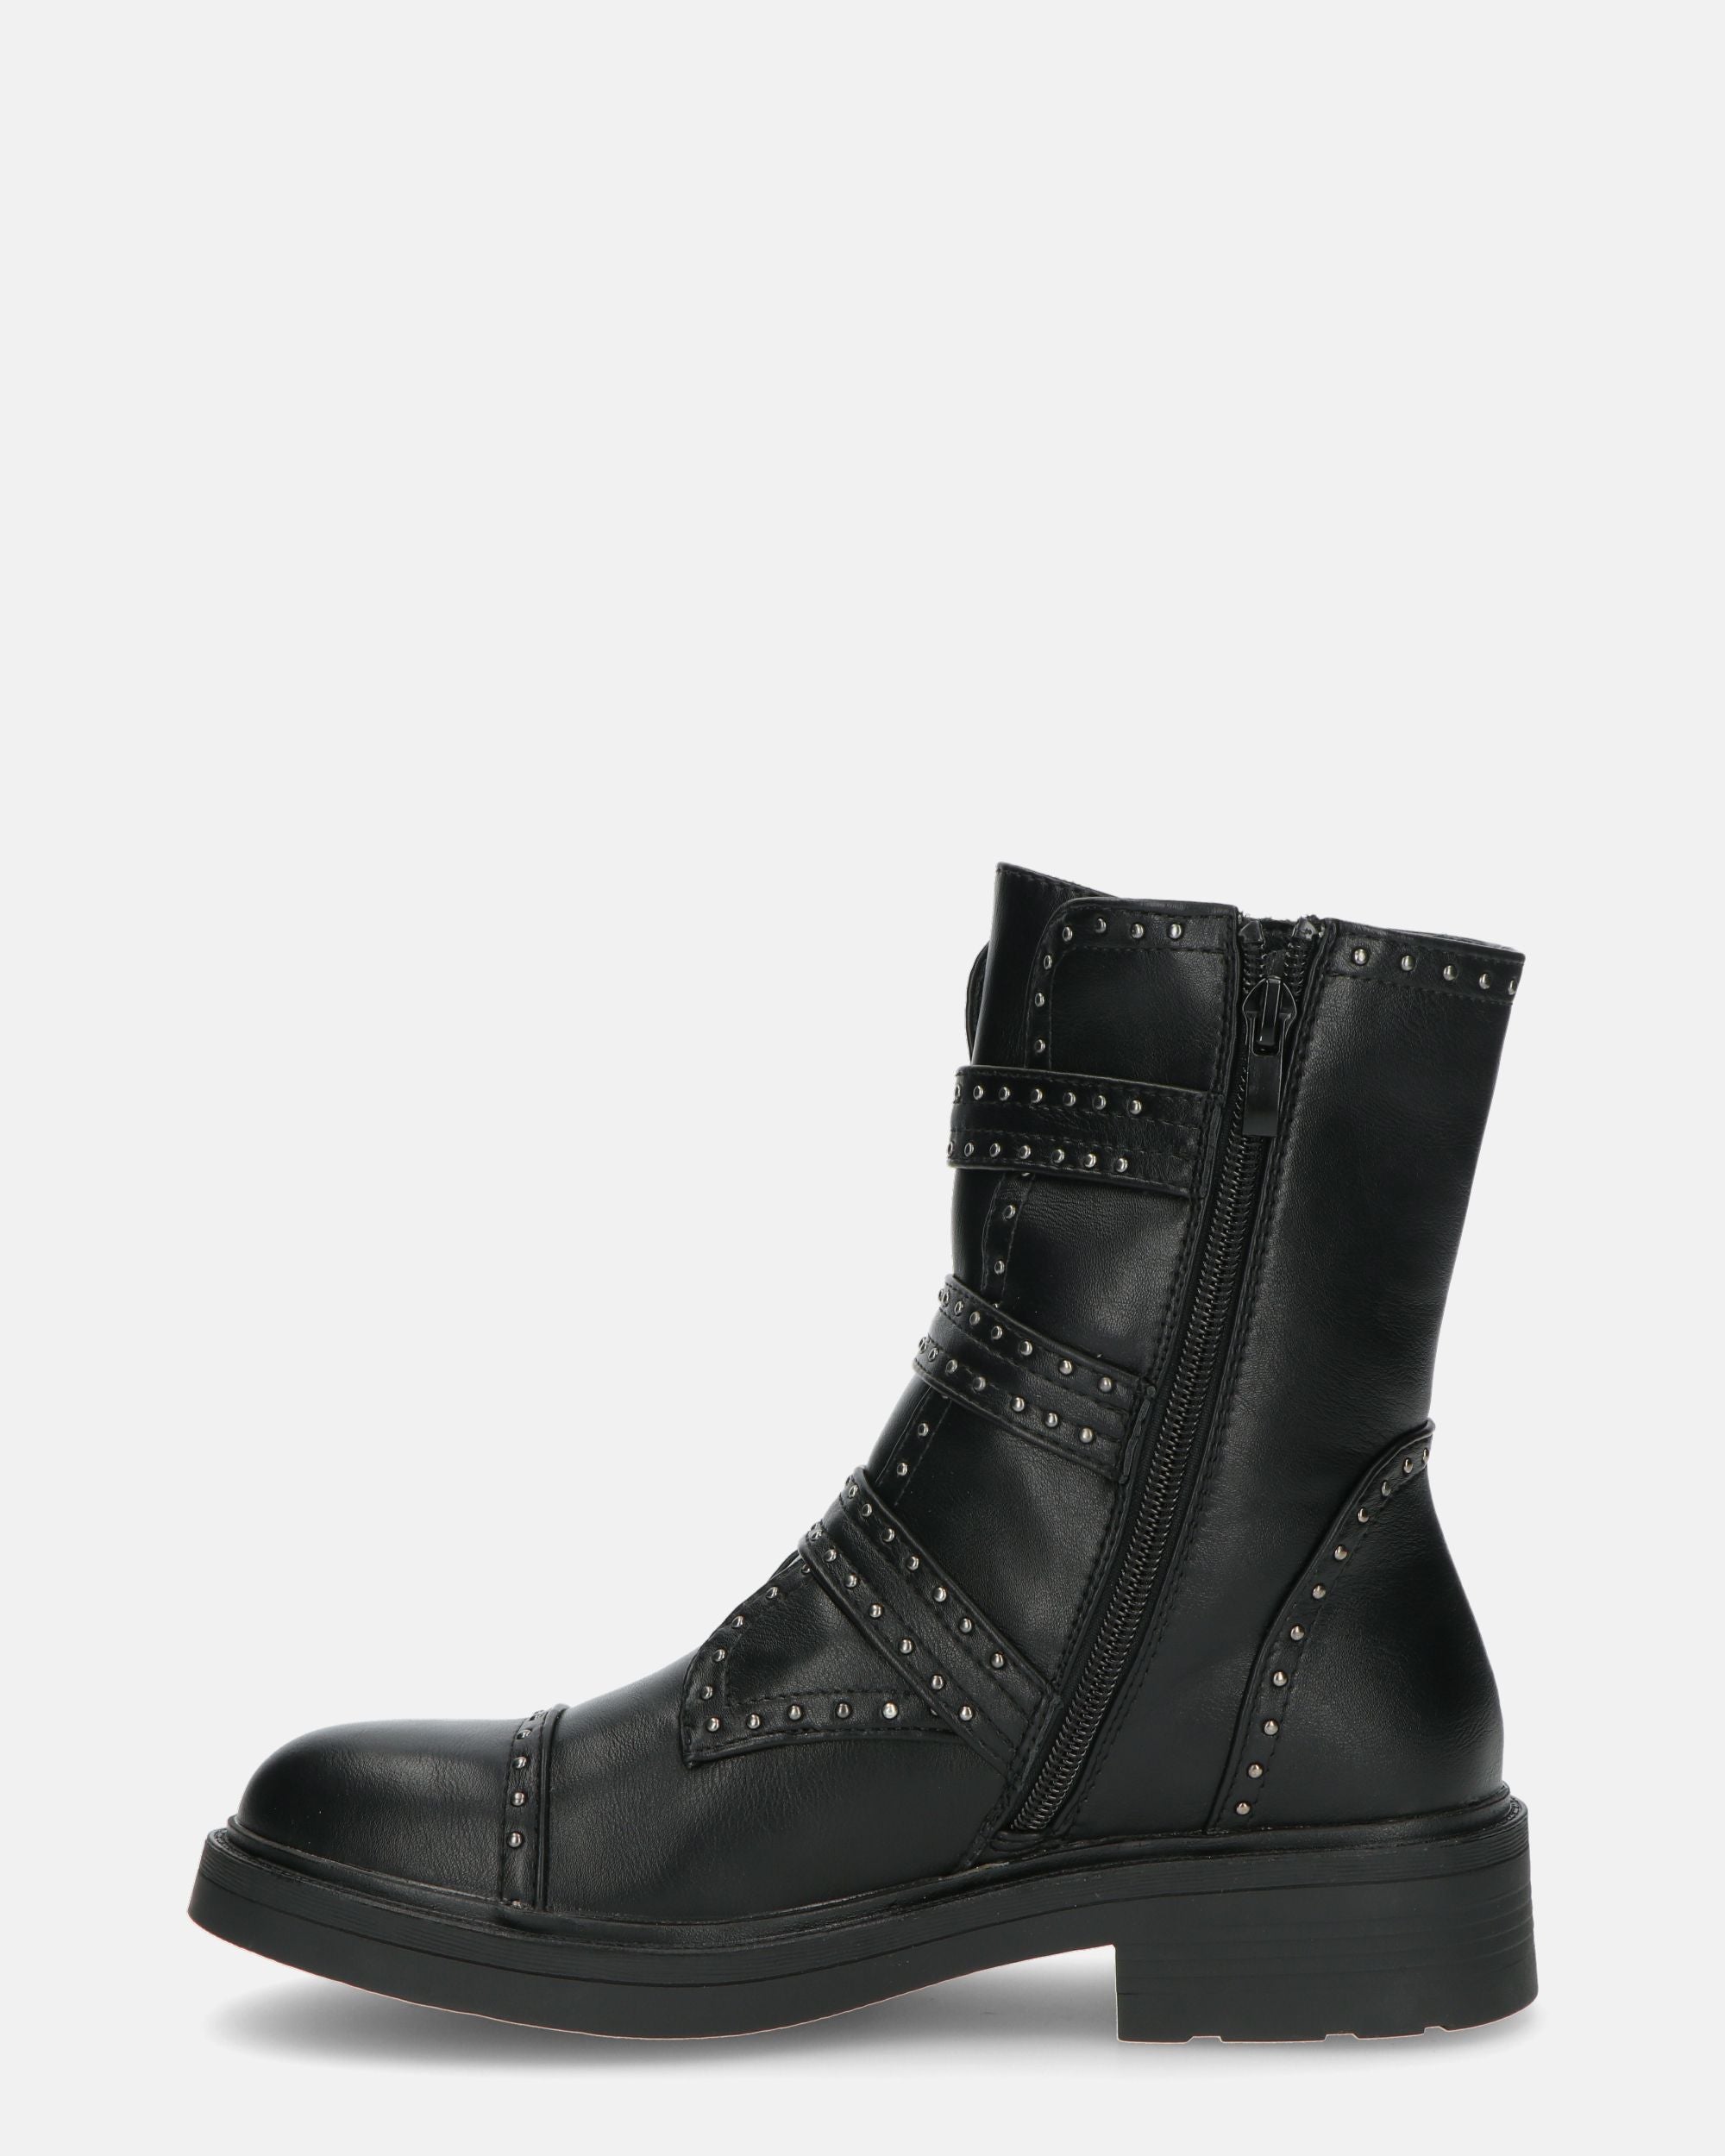 VERDIANA - black ankle boot with side buckles